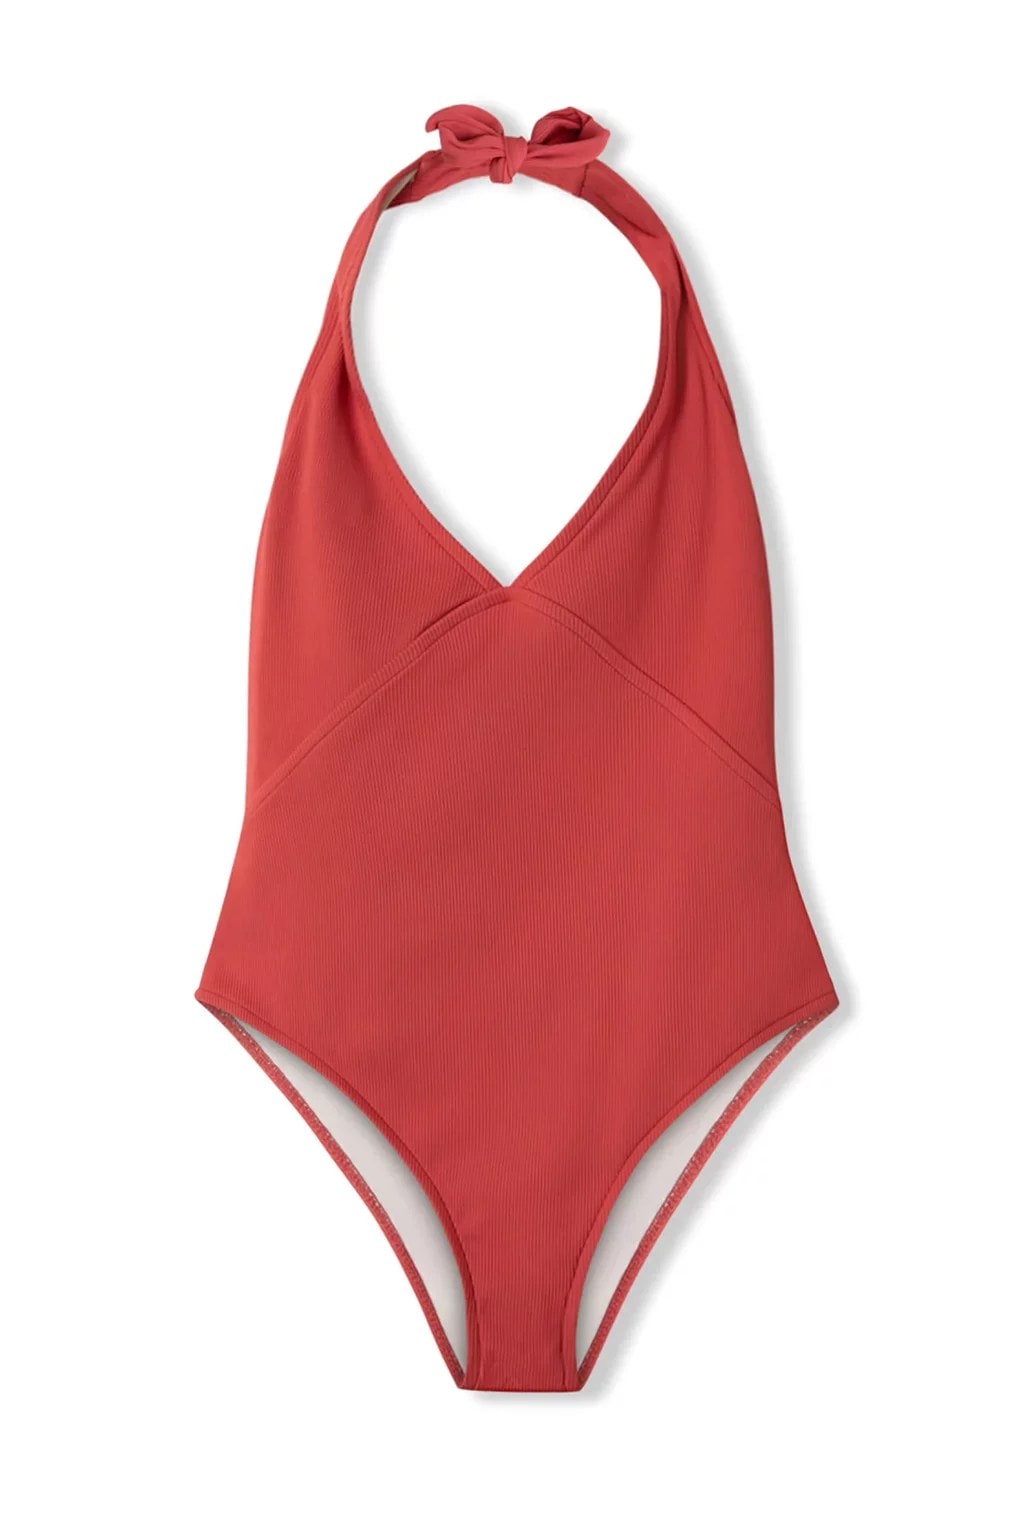 Red halter neck one piece swimsuit from Zulu and Zephyr. 